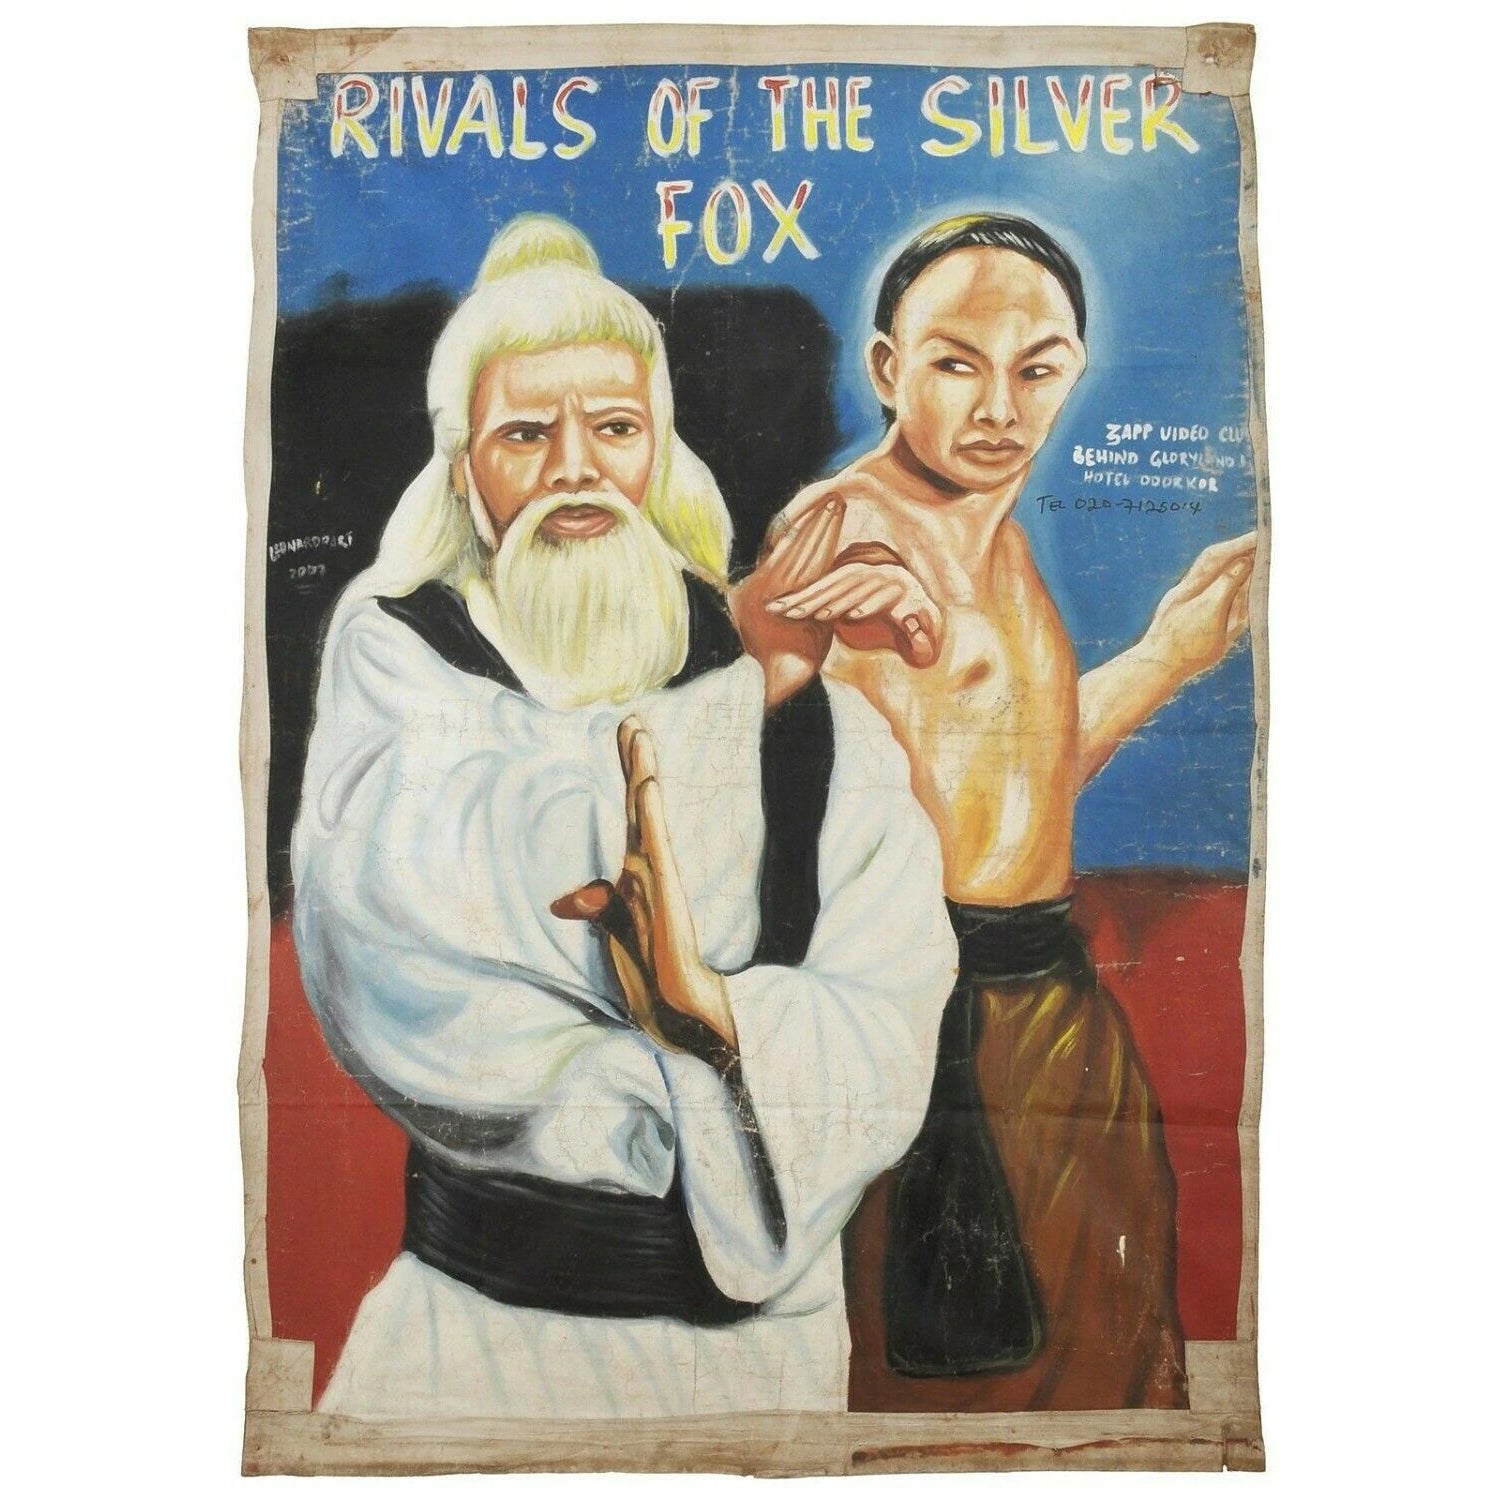 Movie Cinema poster Ghana African oil hand painting RIVALS THE SILVER FOX - Tribalgh